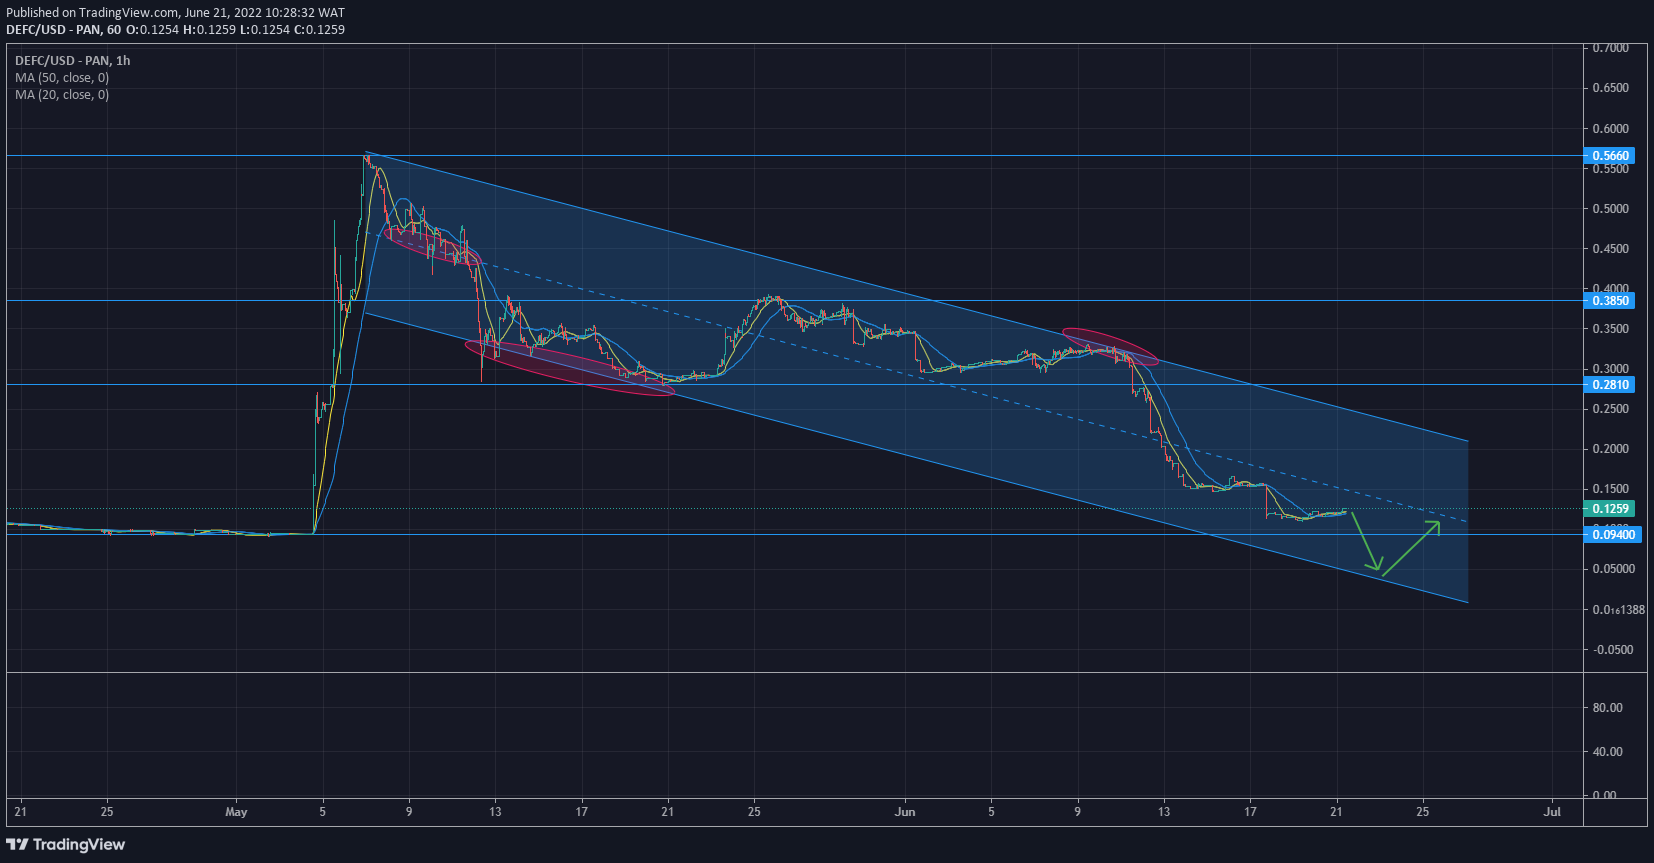 DeFI Coin Price Forecast: DeFI Coin Dives to Support Level in a Bearish Channel